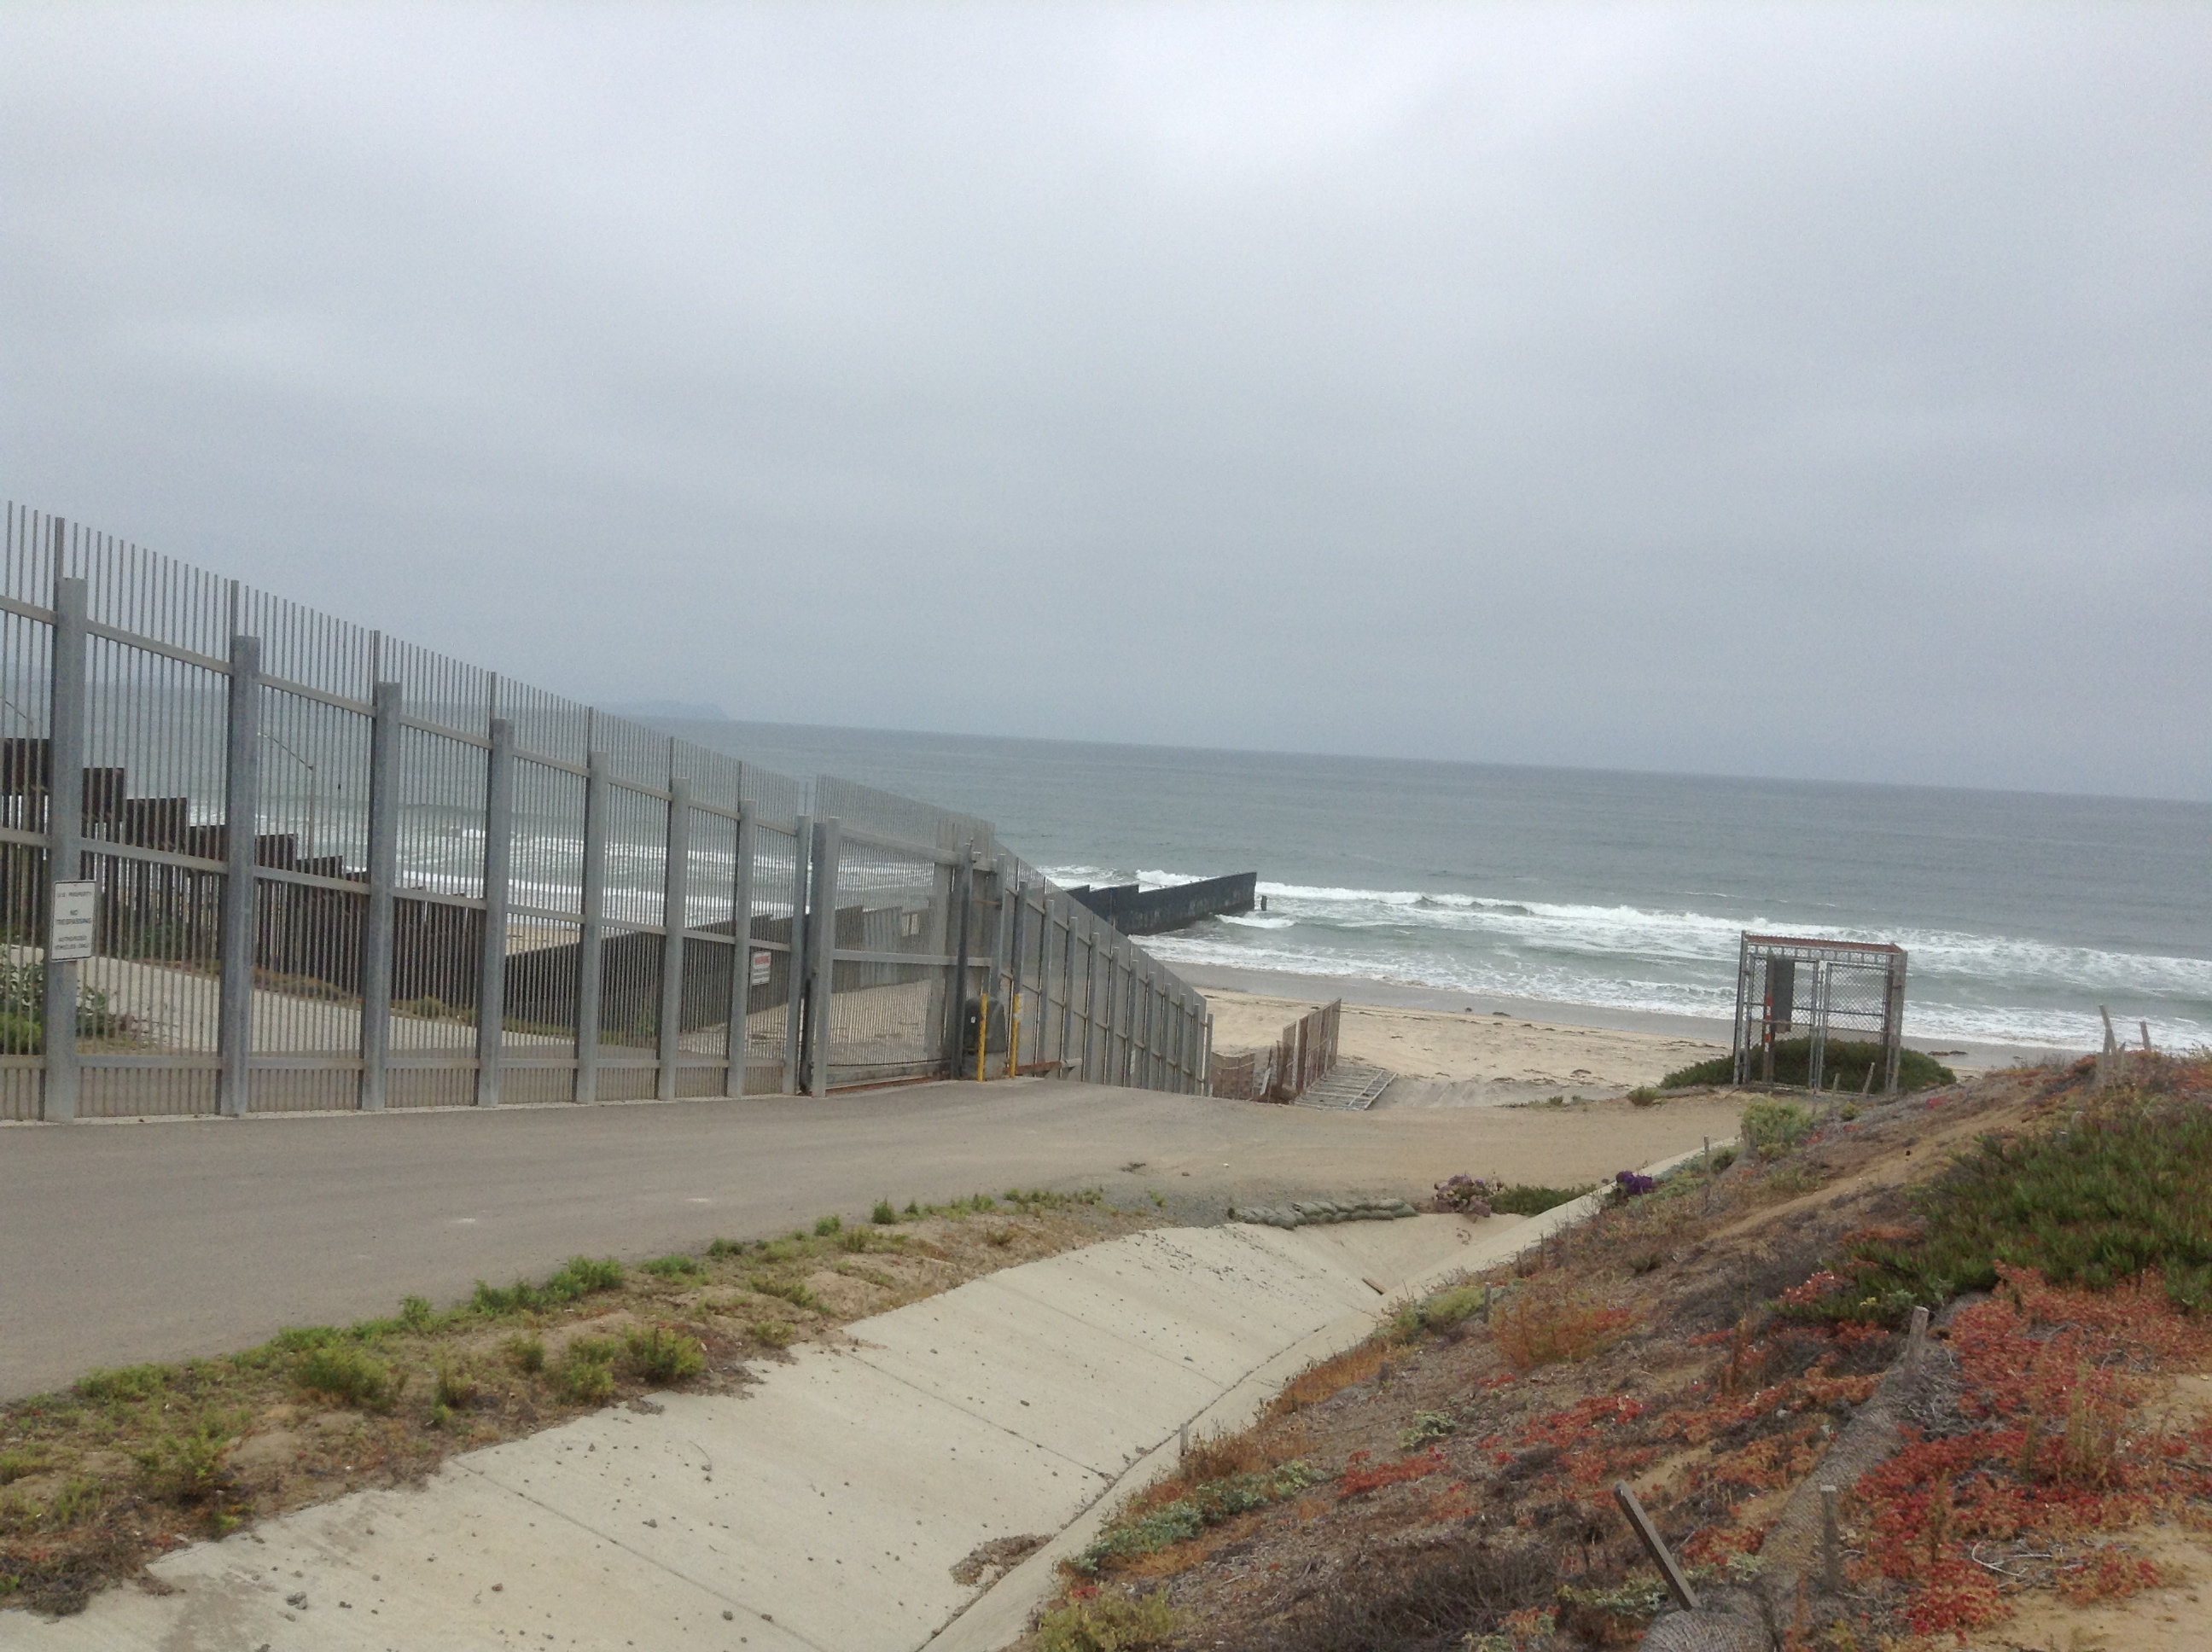 The border wall that separates the US from Tijuana